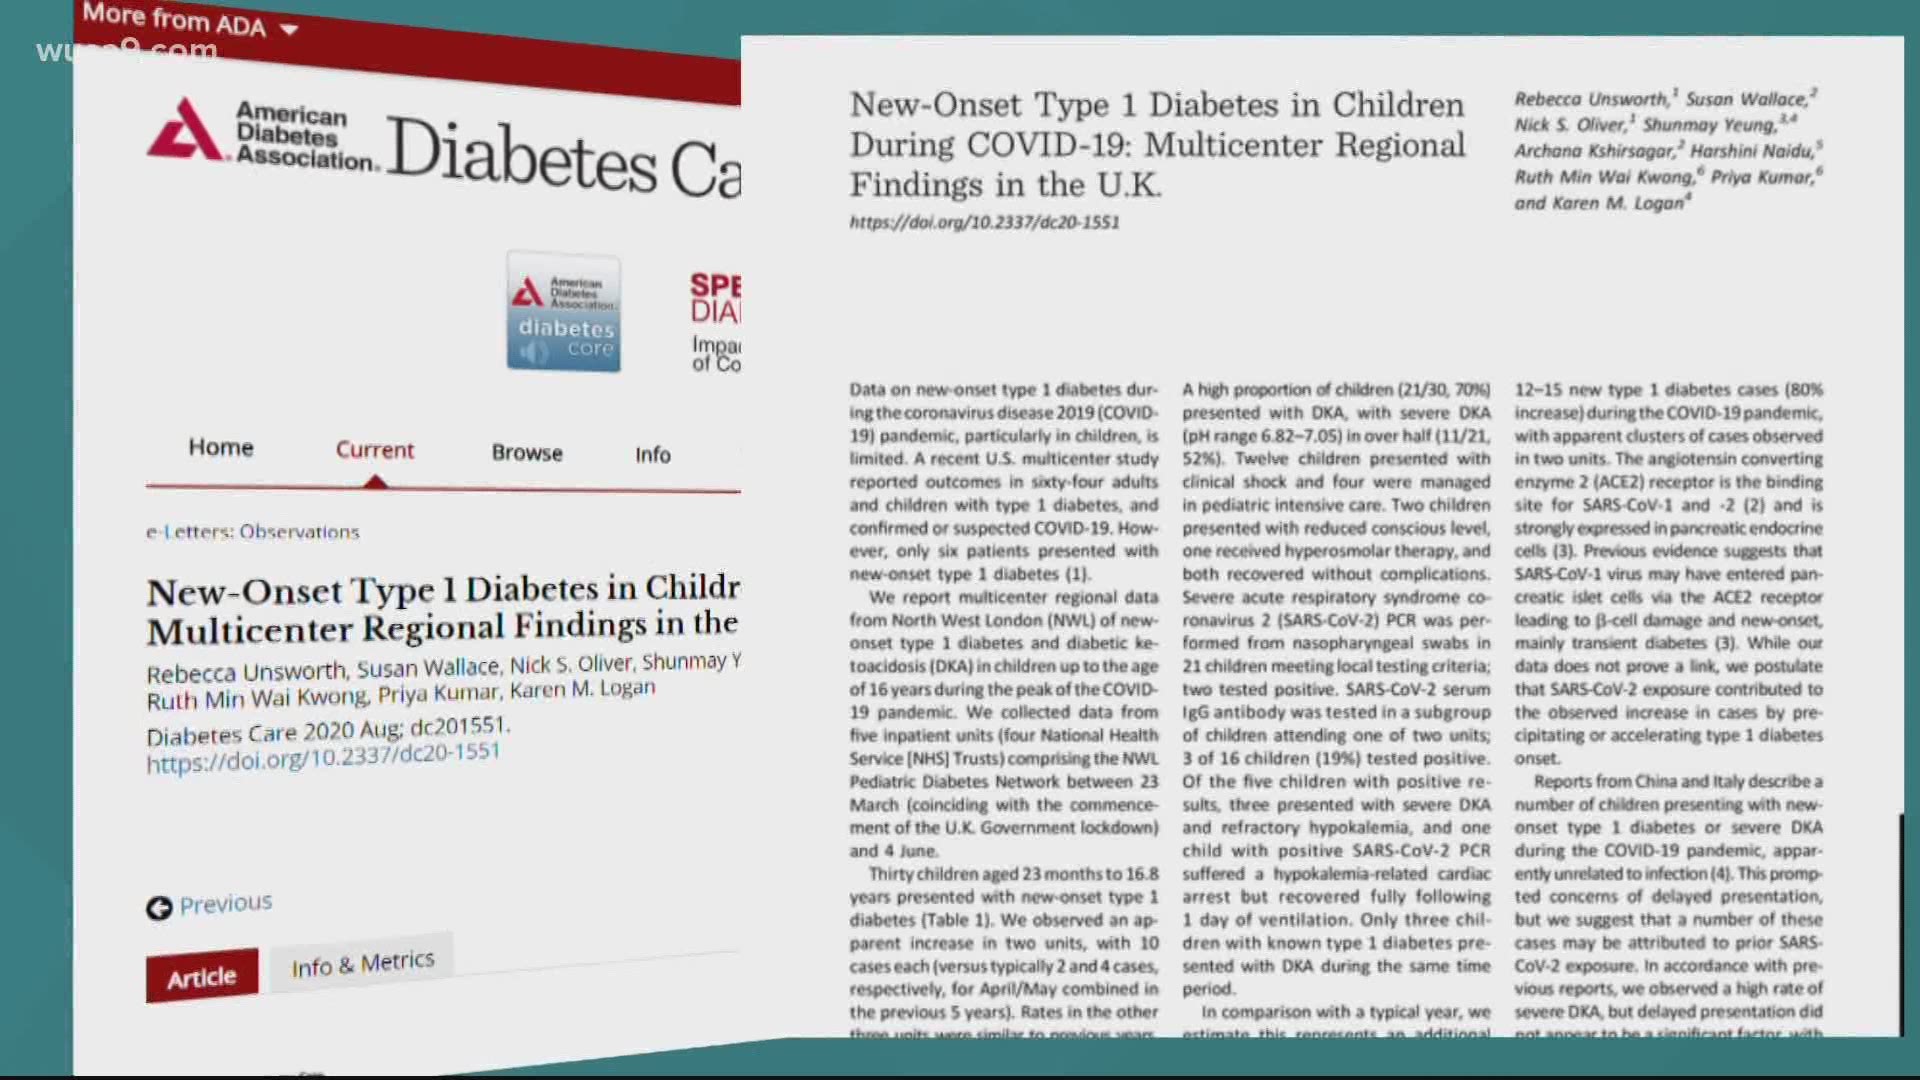 A small study in the U.K. says cases of Type 1 diabetes nearly doubled in children during the peak of the pandemic.